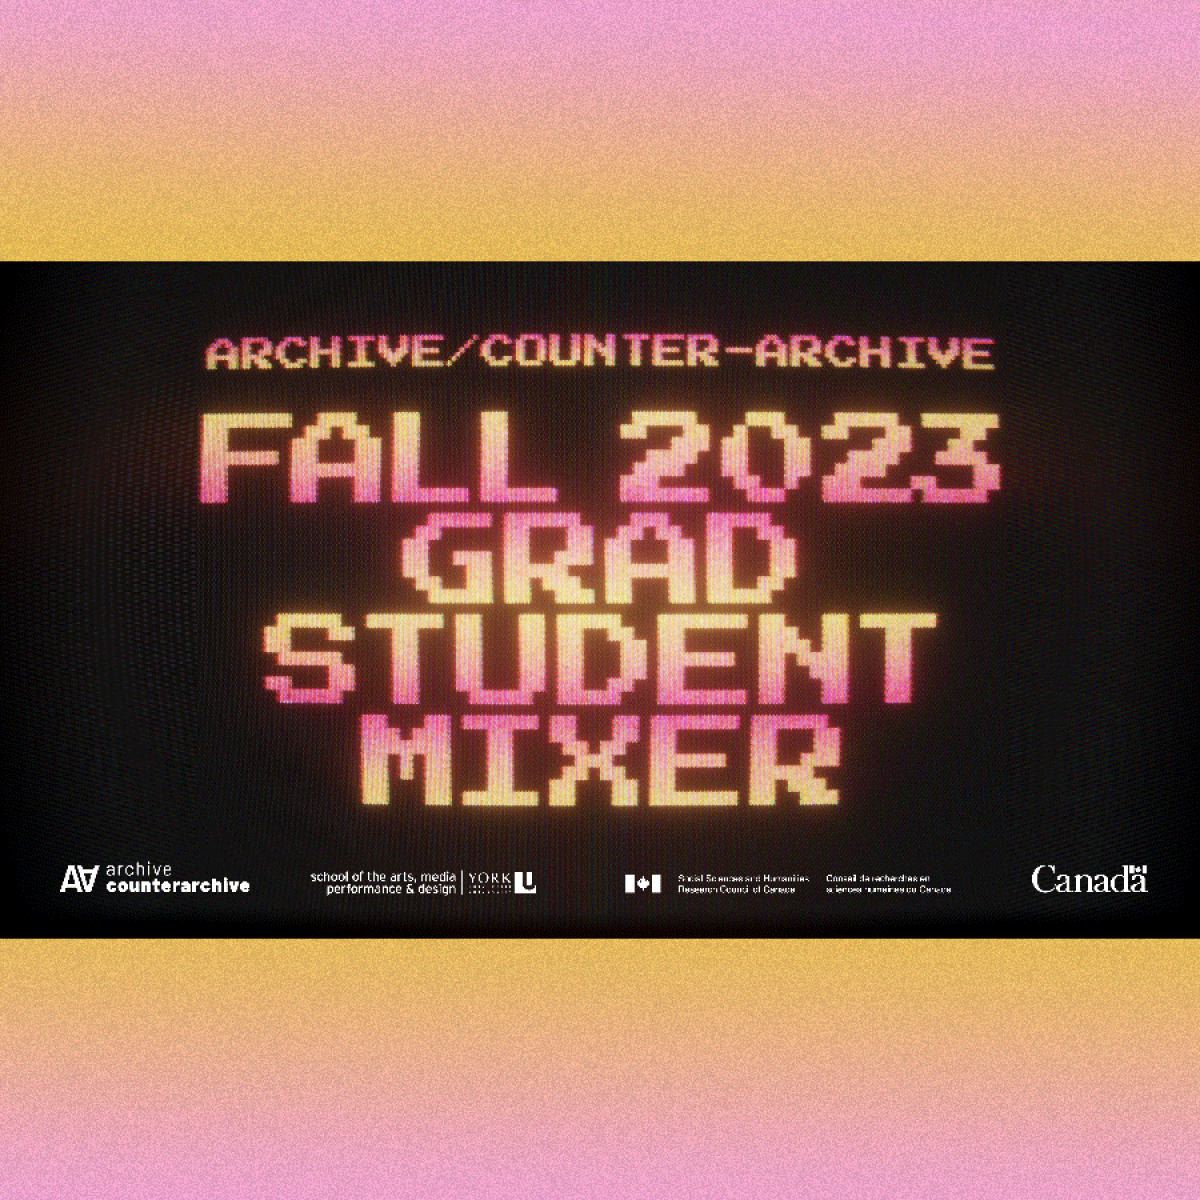 A square promotional image showing the text "Archive/Counter-Archive Fall 2023 Grad student Mixer" in pixelated block font against a black, pink, and orange background.